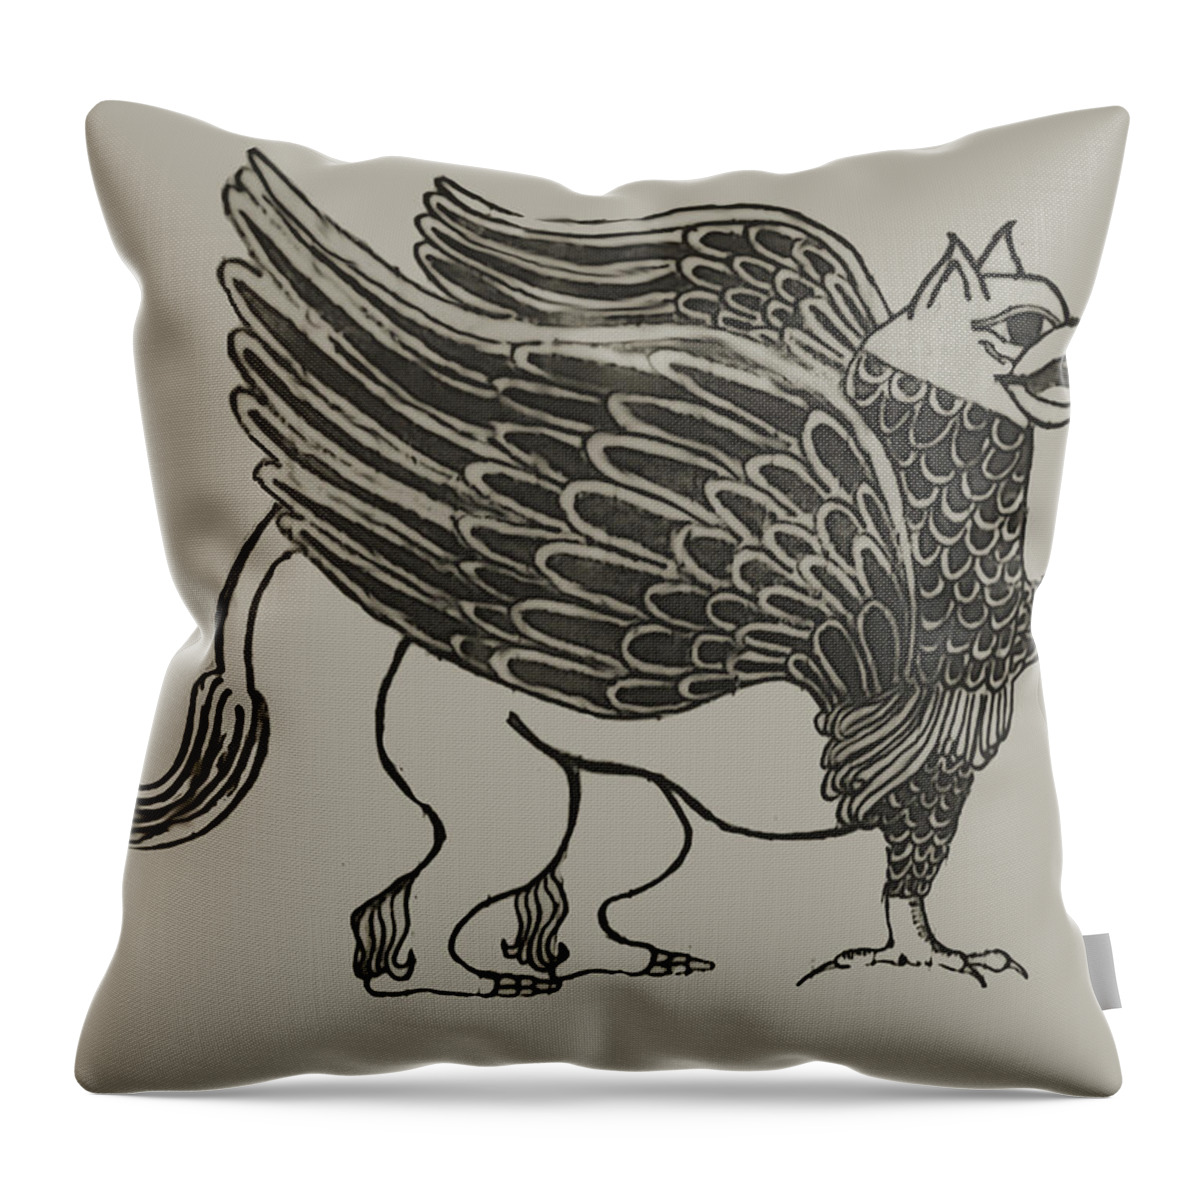 Griffin Throw Pillow featuring the mixed media A Griffin Tattoo Style by Shelli Fitzpatrick